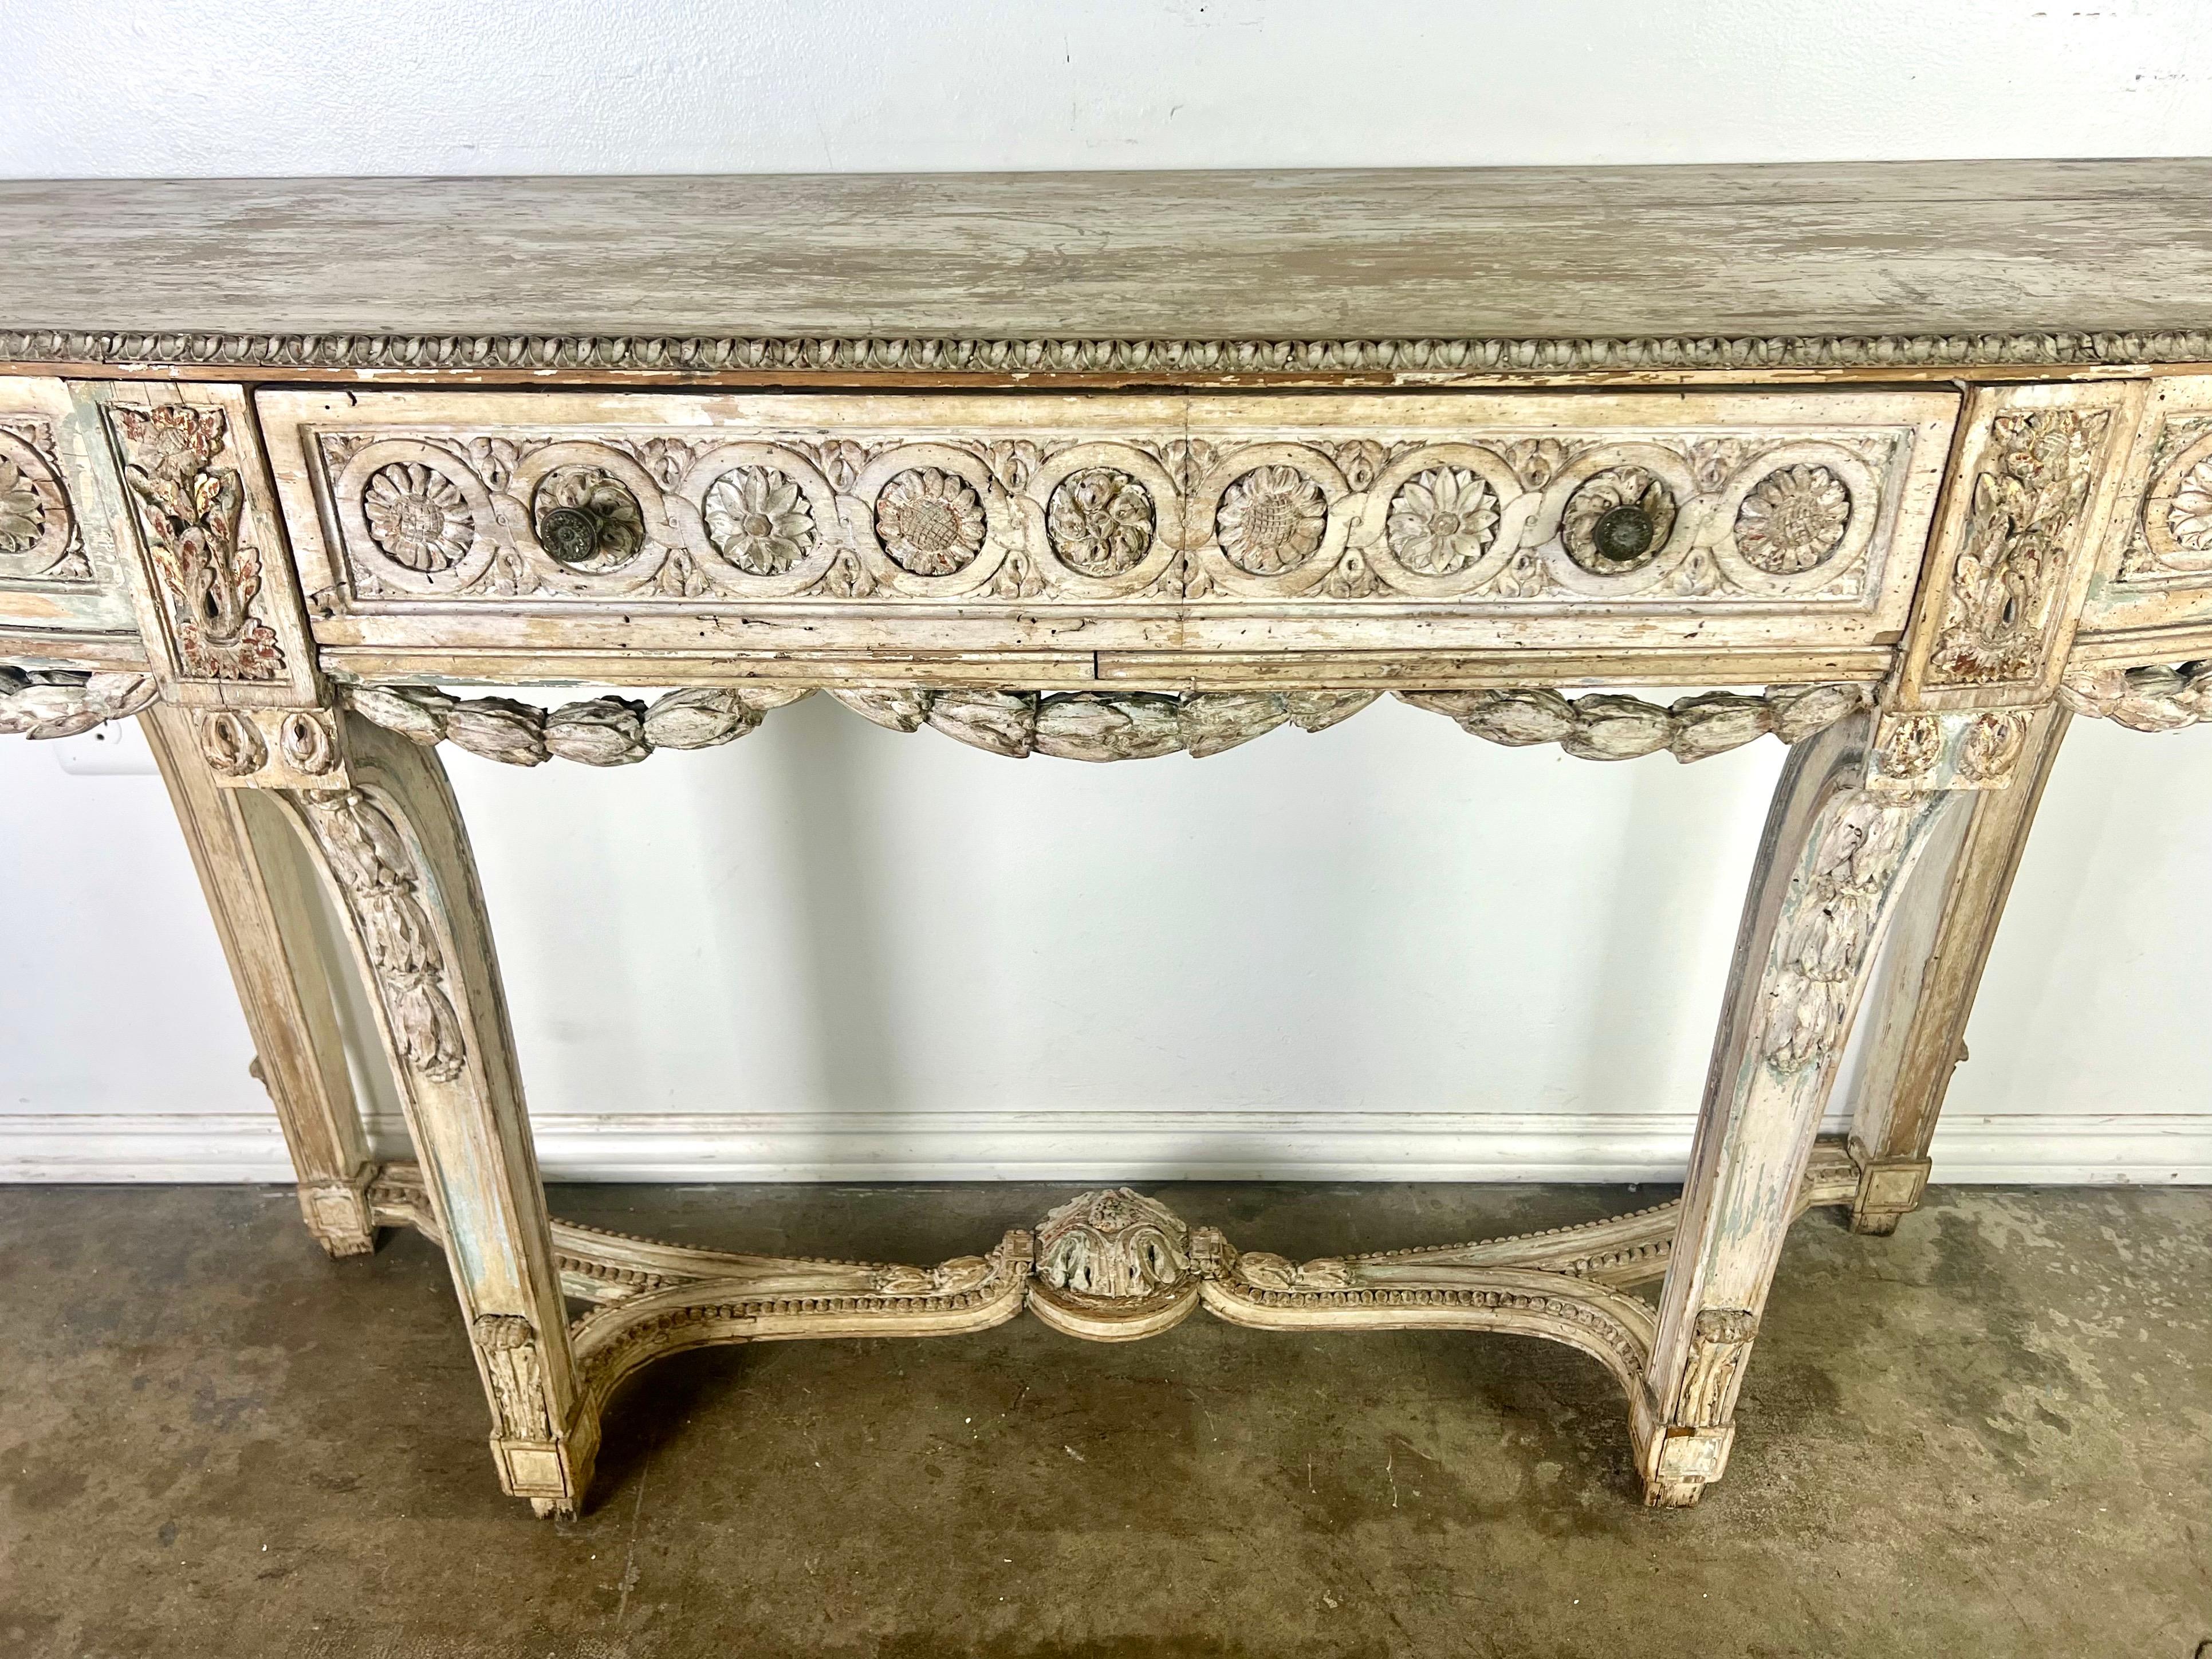 French Provincial 19th Century French Painted Console w/ Carved Swags & Drawers For Sale